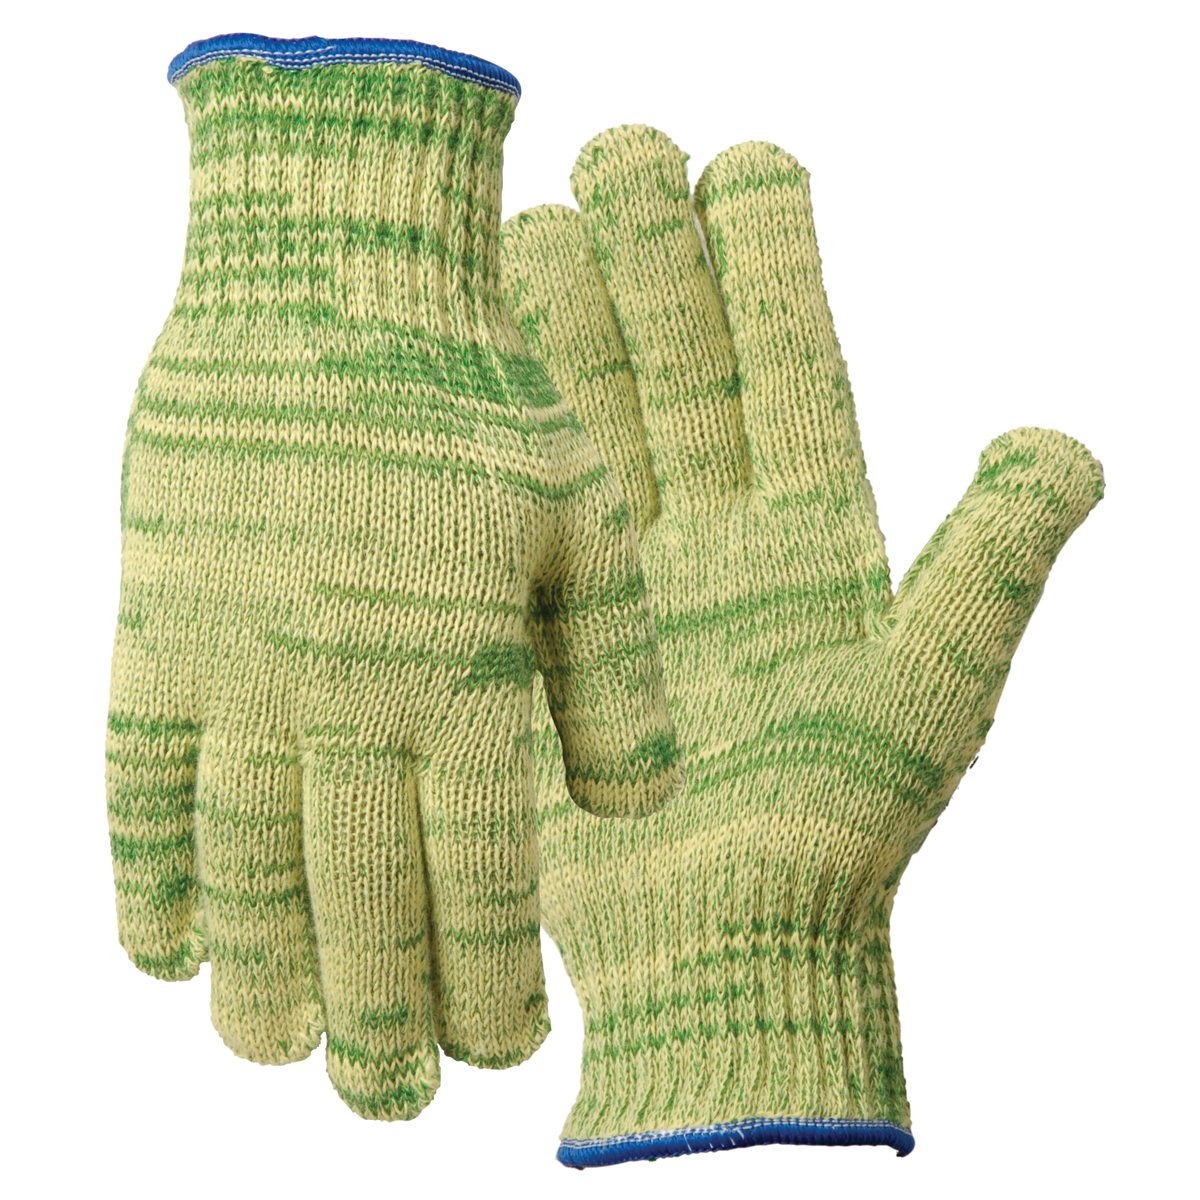 Wells Lamont Large METALGUARD®/Whizard® 7 Gauge Fiber And Stainless Steel Cut Resistant Gloves